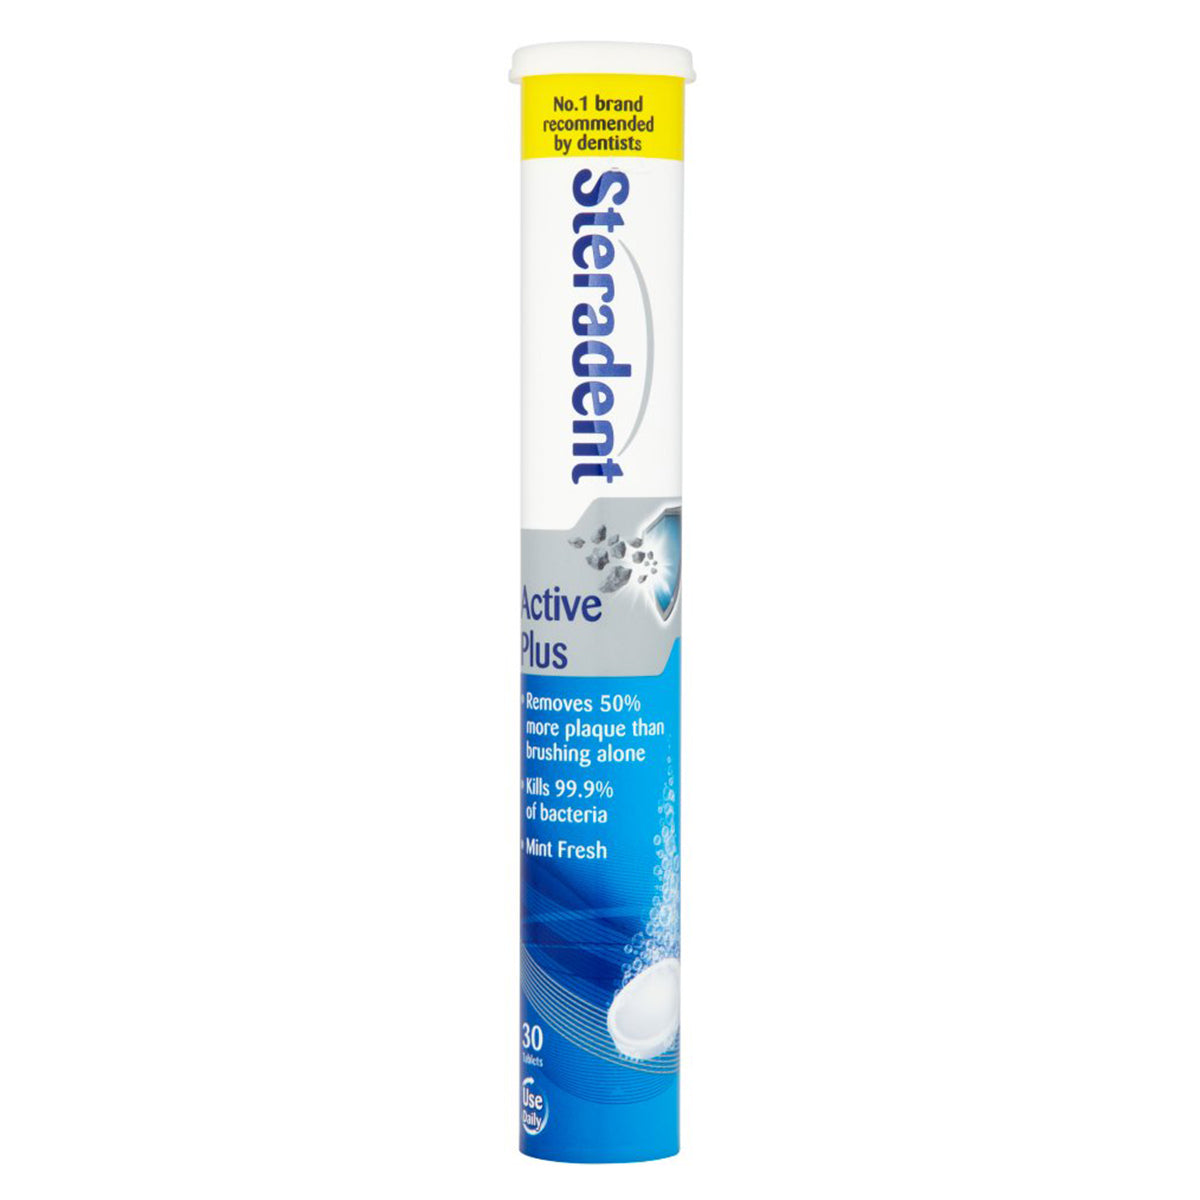 A tube of Steradent - Active Plus Denture Cleanser - 30 Tablets on a white background.